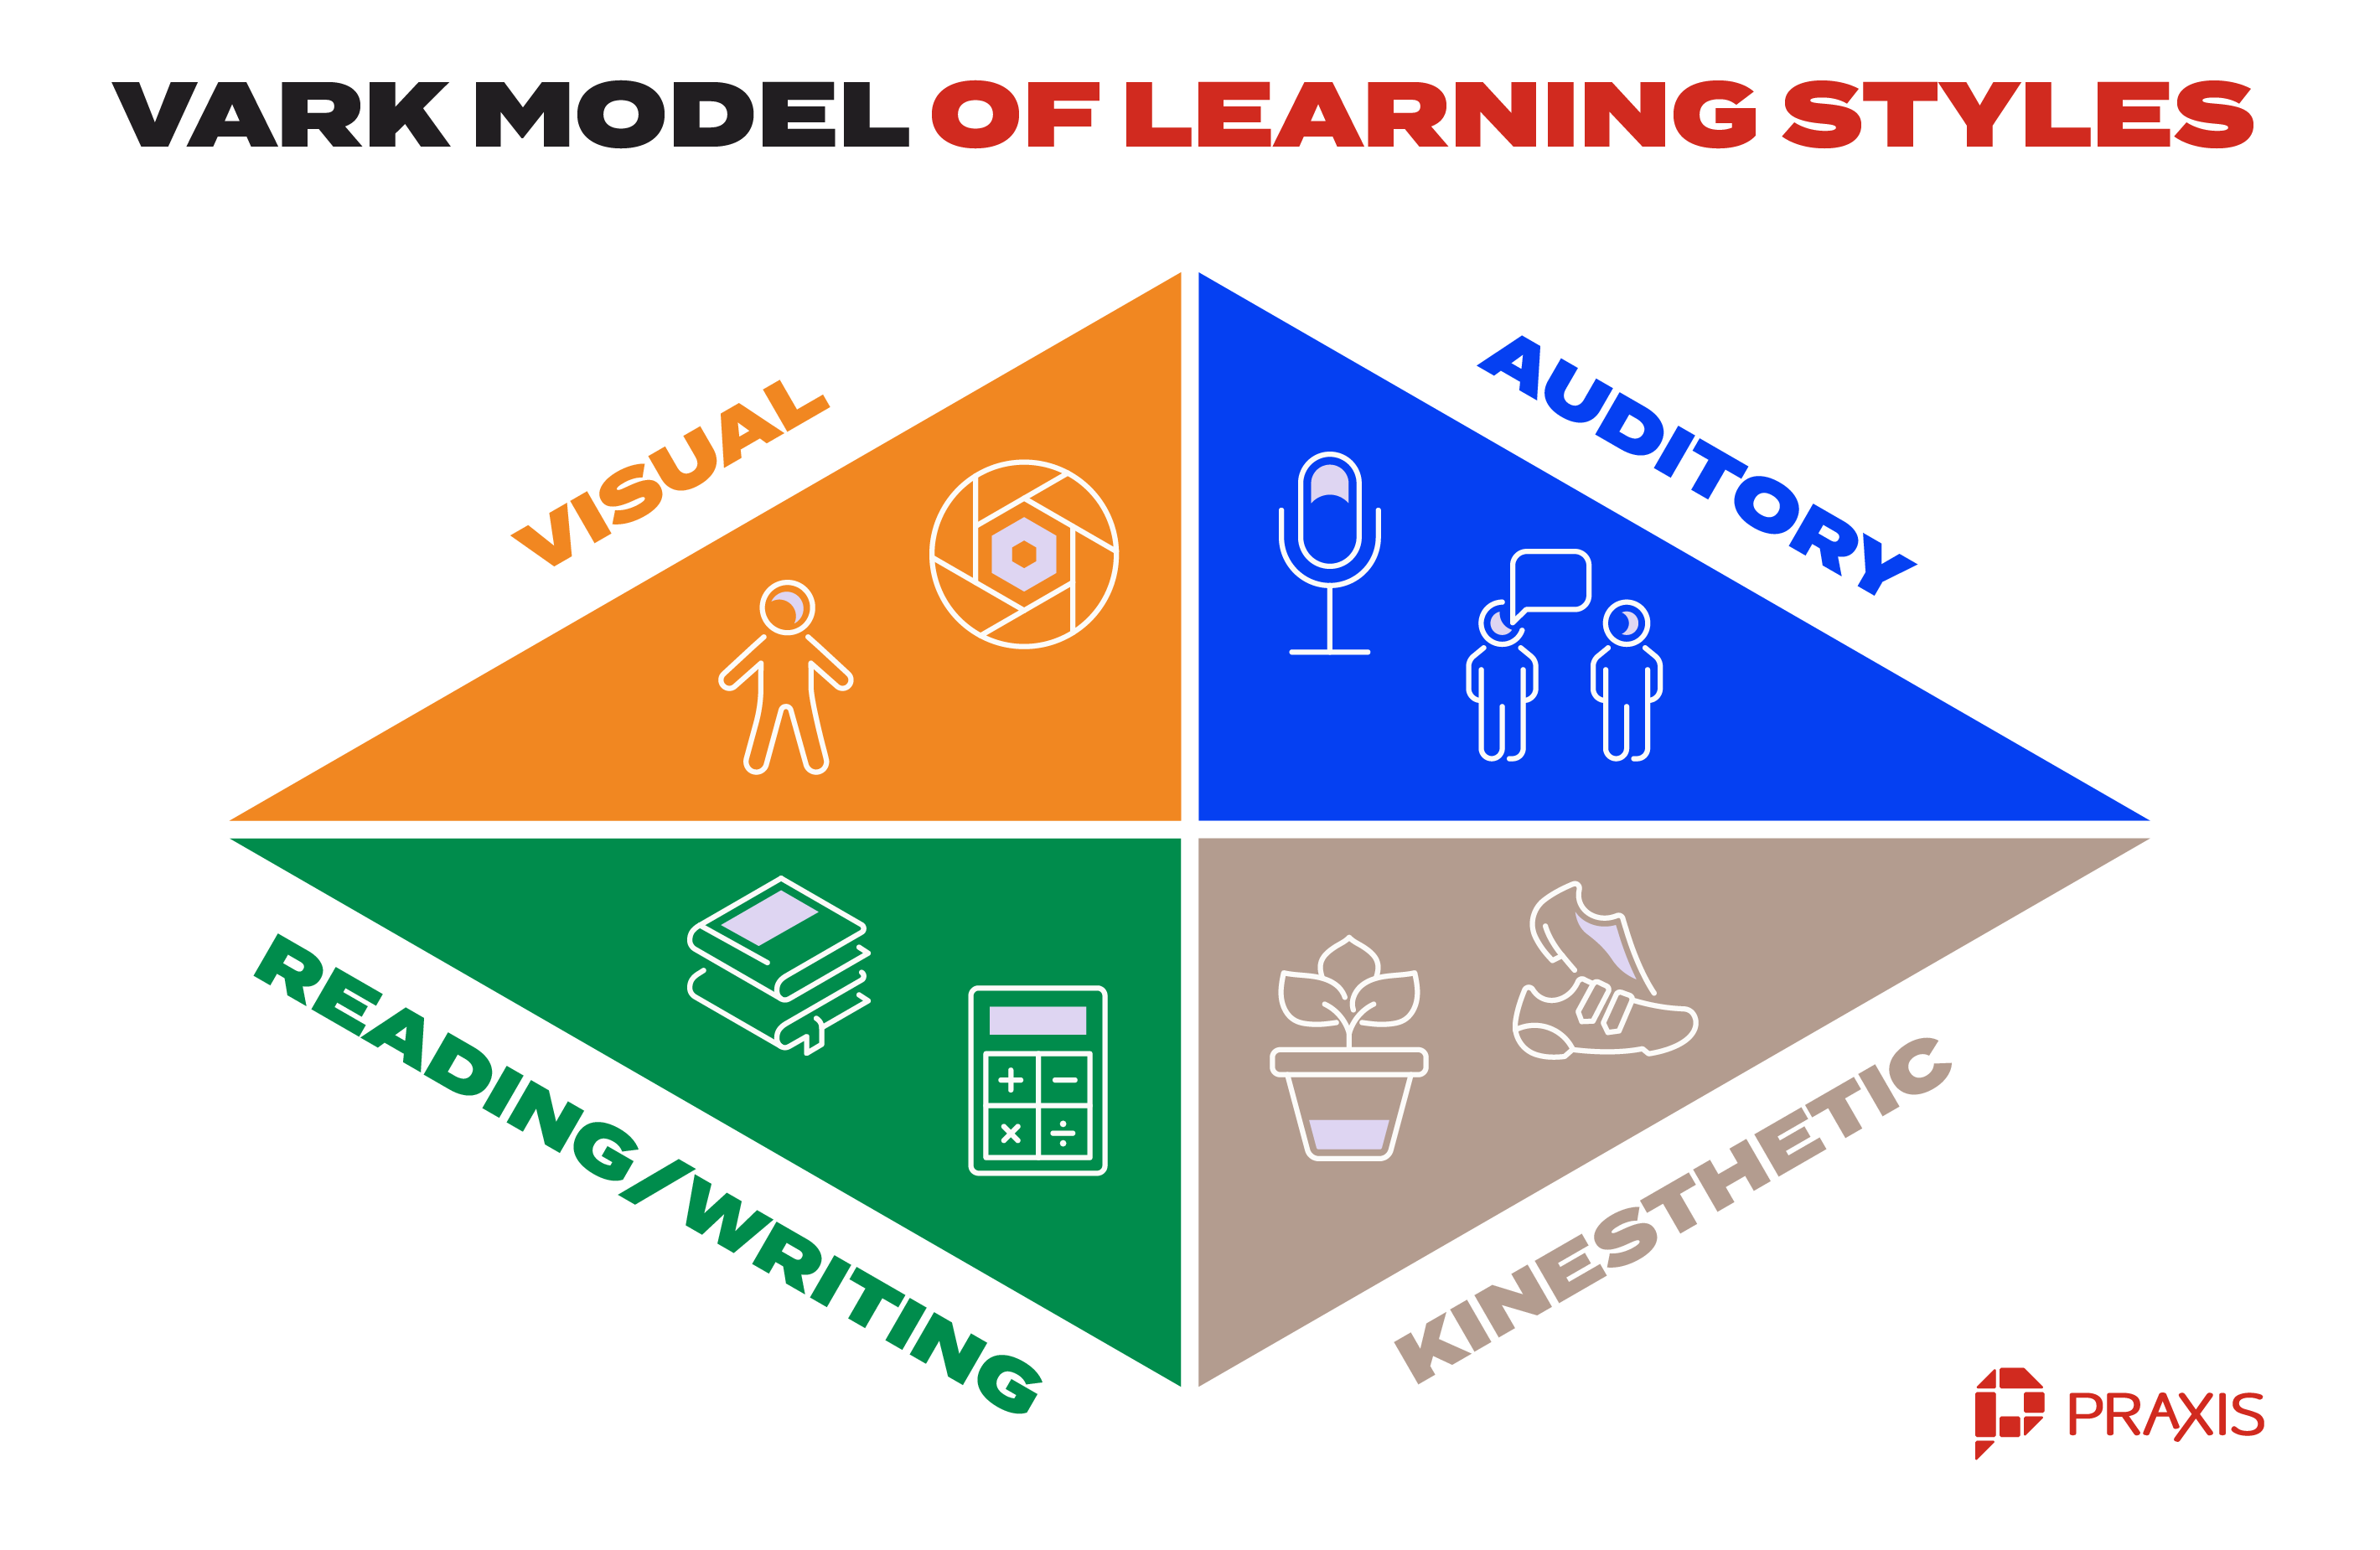 A 4-Step Self-Directed Learning Process